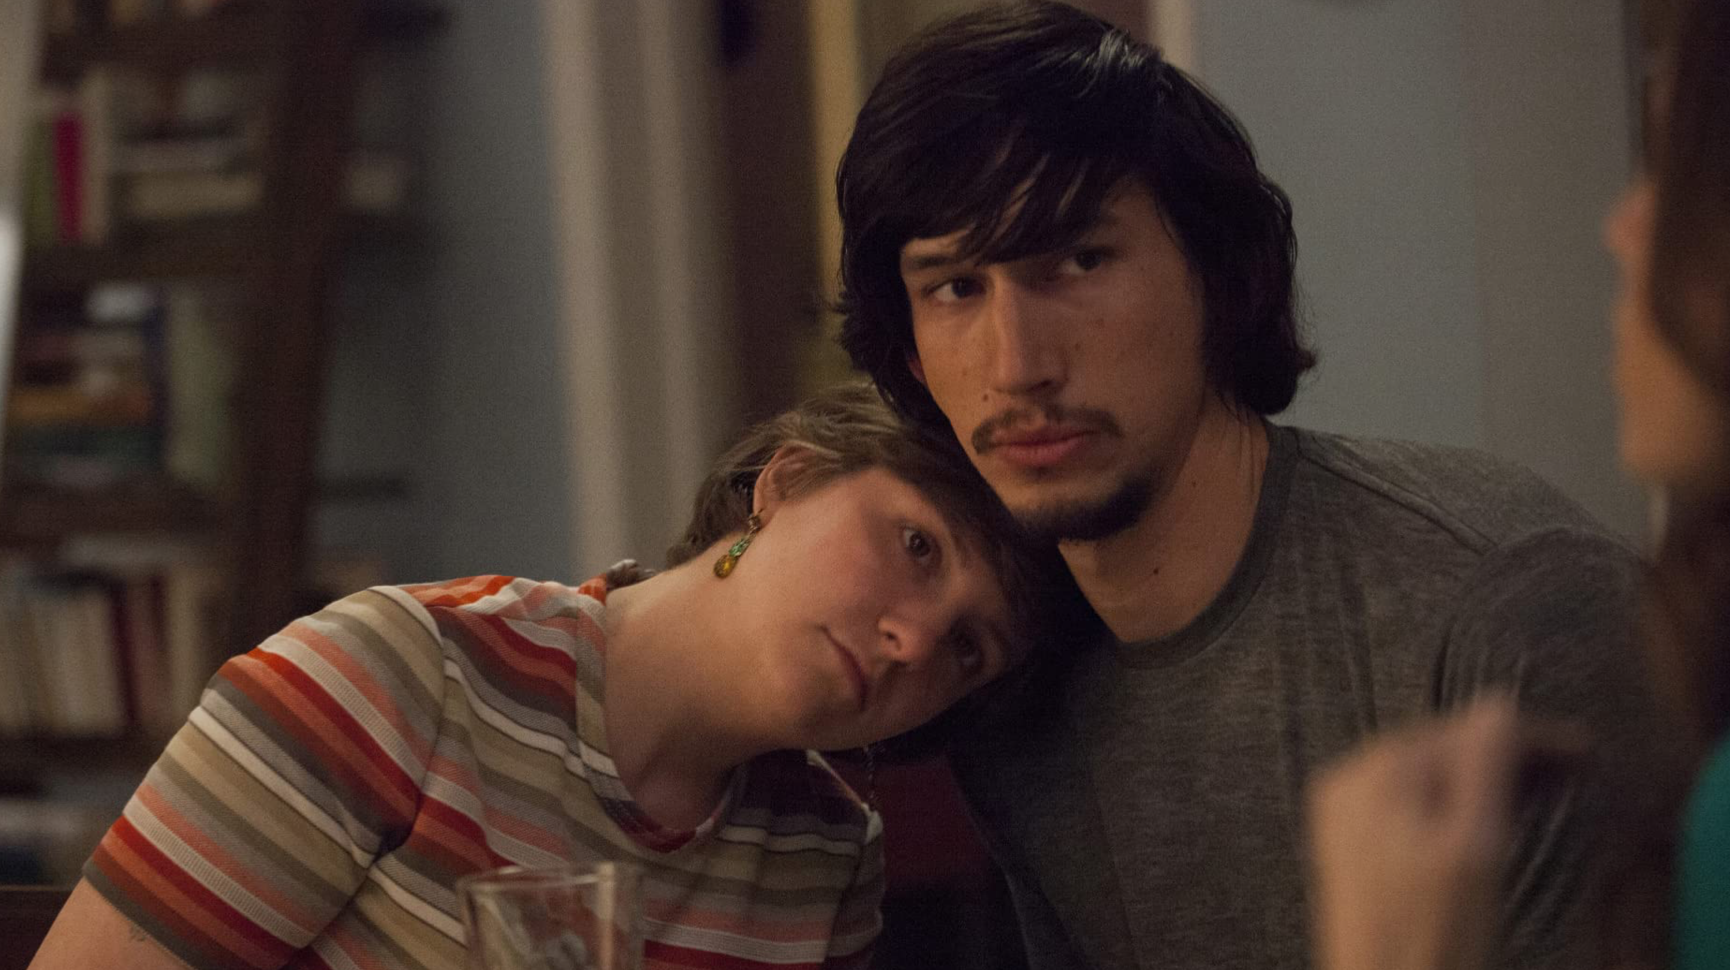 Lena Dunham and Adam Driver snuggling together in this image from Apatow Productions